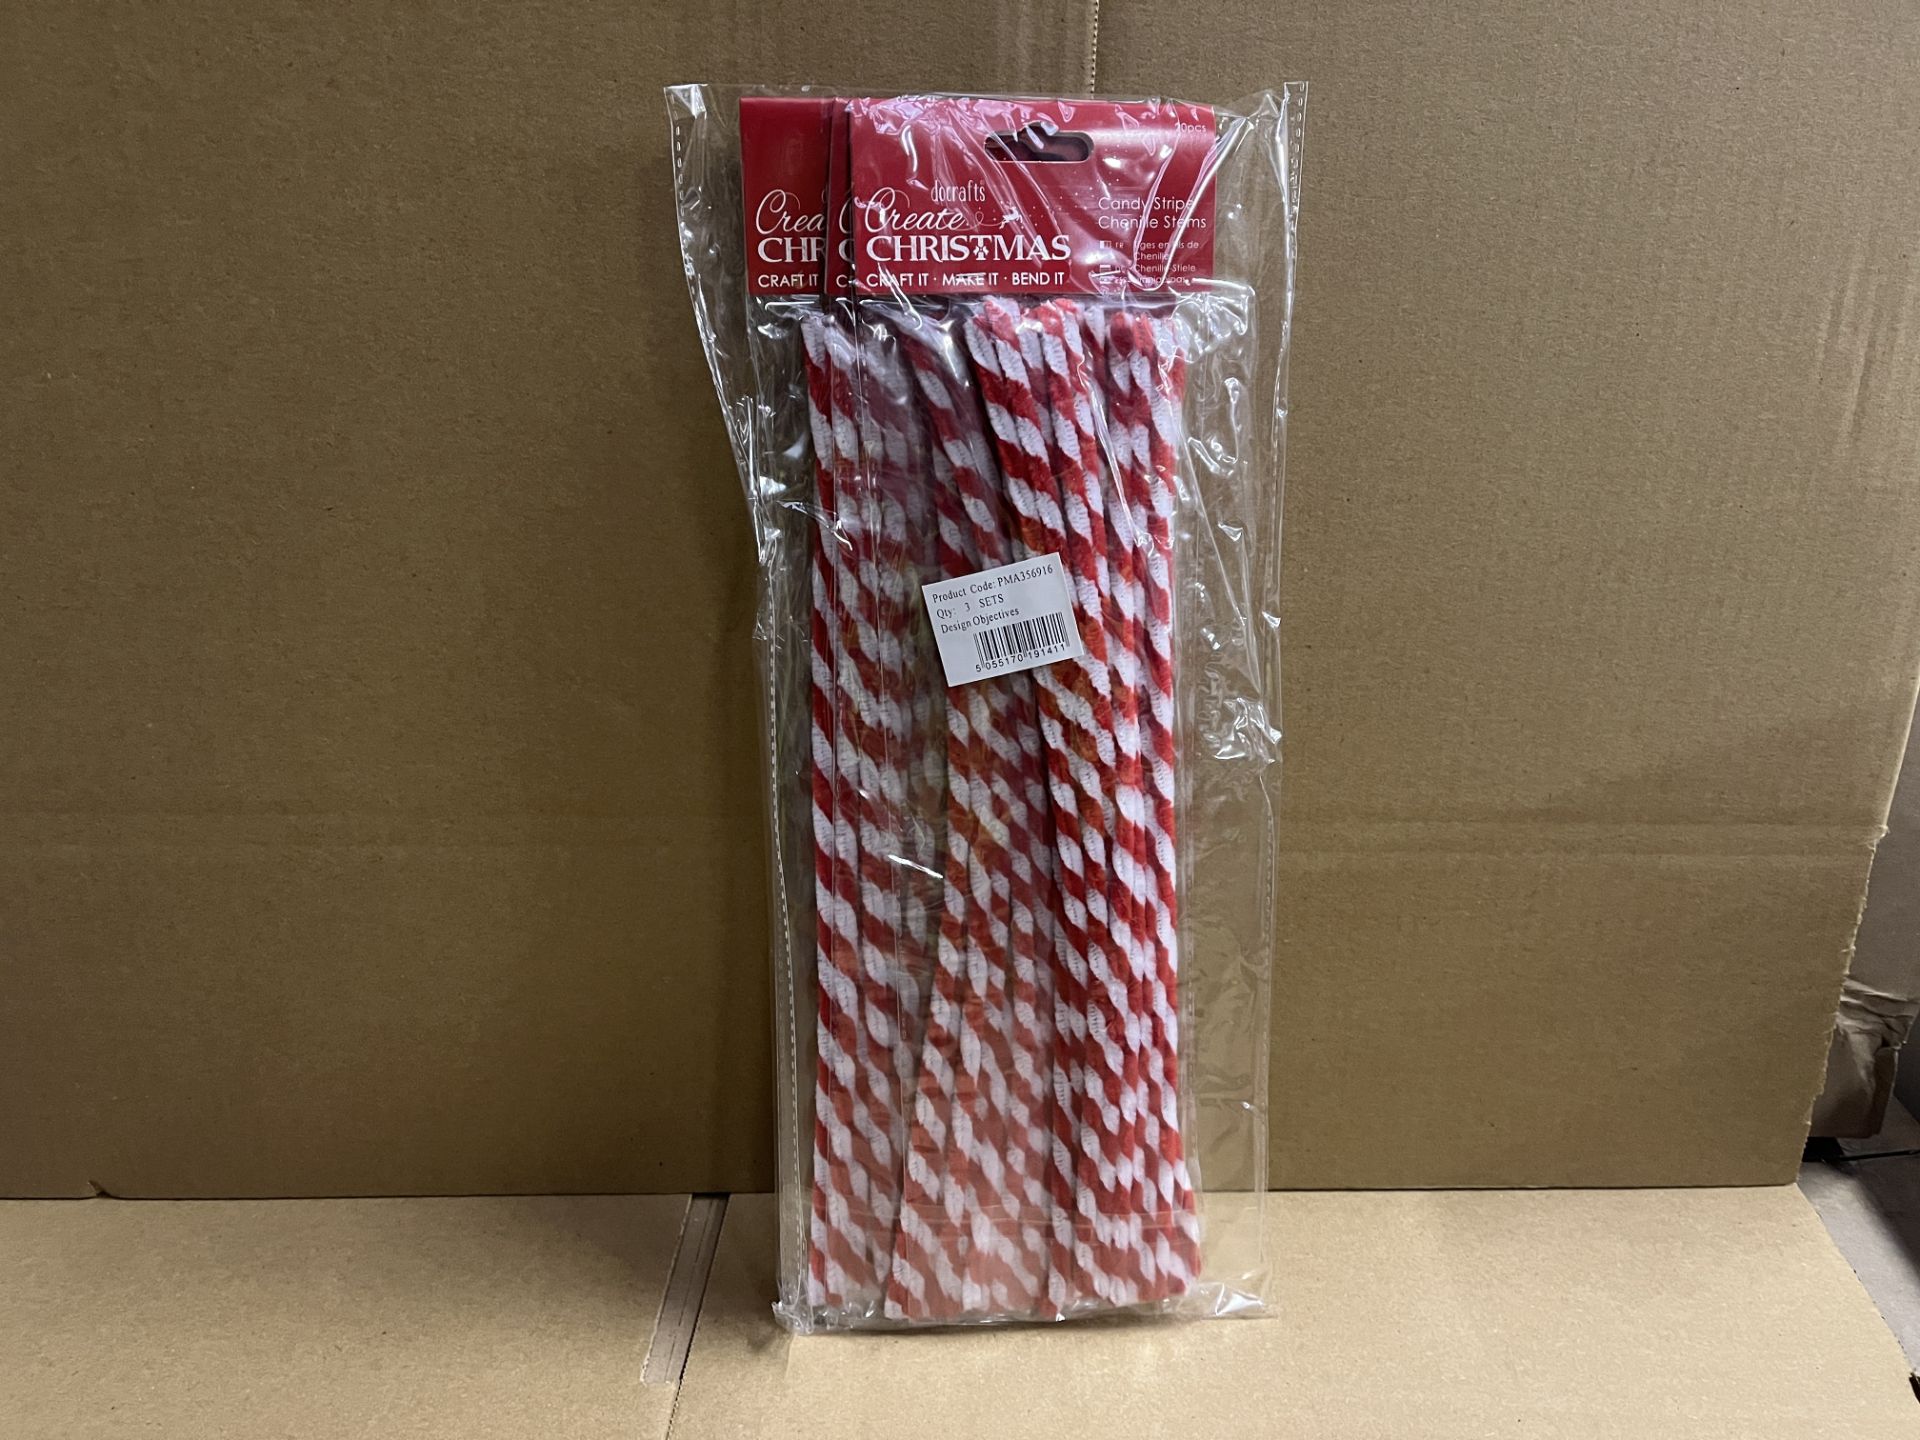 216 X BRAND NEW PACKS OF 3 DOCRAFTS CREATE CHRISTMAS CANDY STRIPE CHENILE STEMS IN 3 BOXES S2